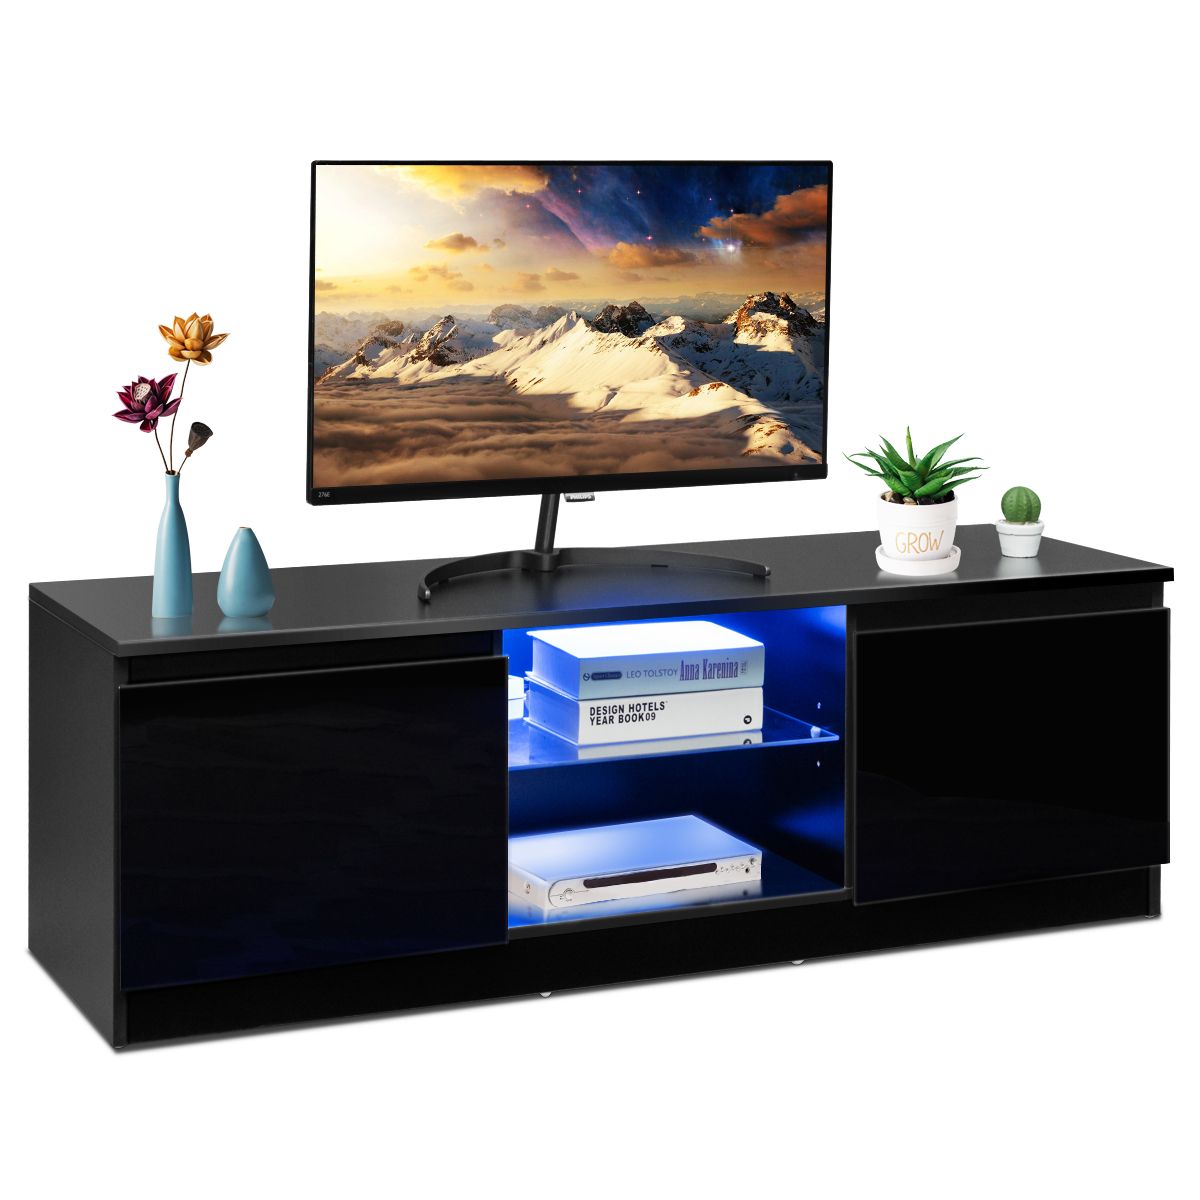 Costway High Gloss Tv Stand Media Console Cabinet W/ Led Inside Black Gloss Tv Stands (View 1 of 15)